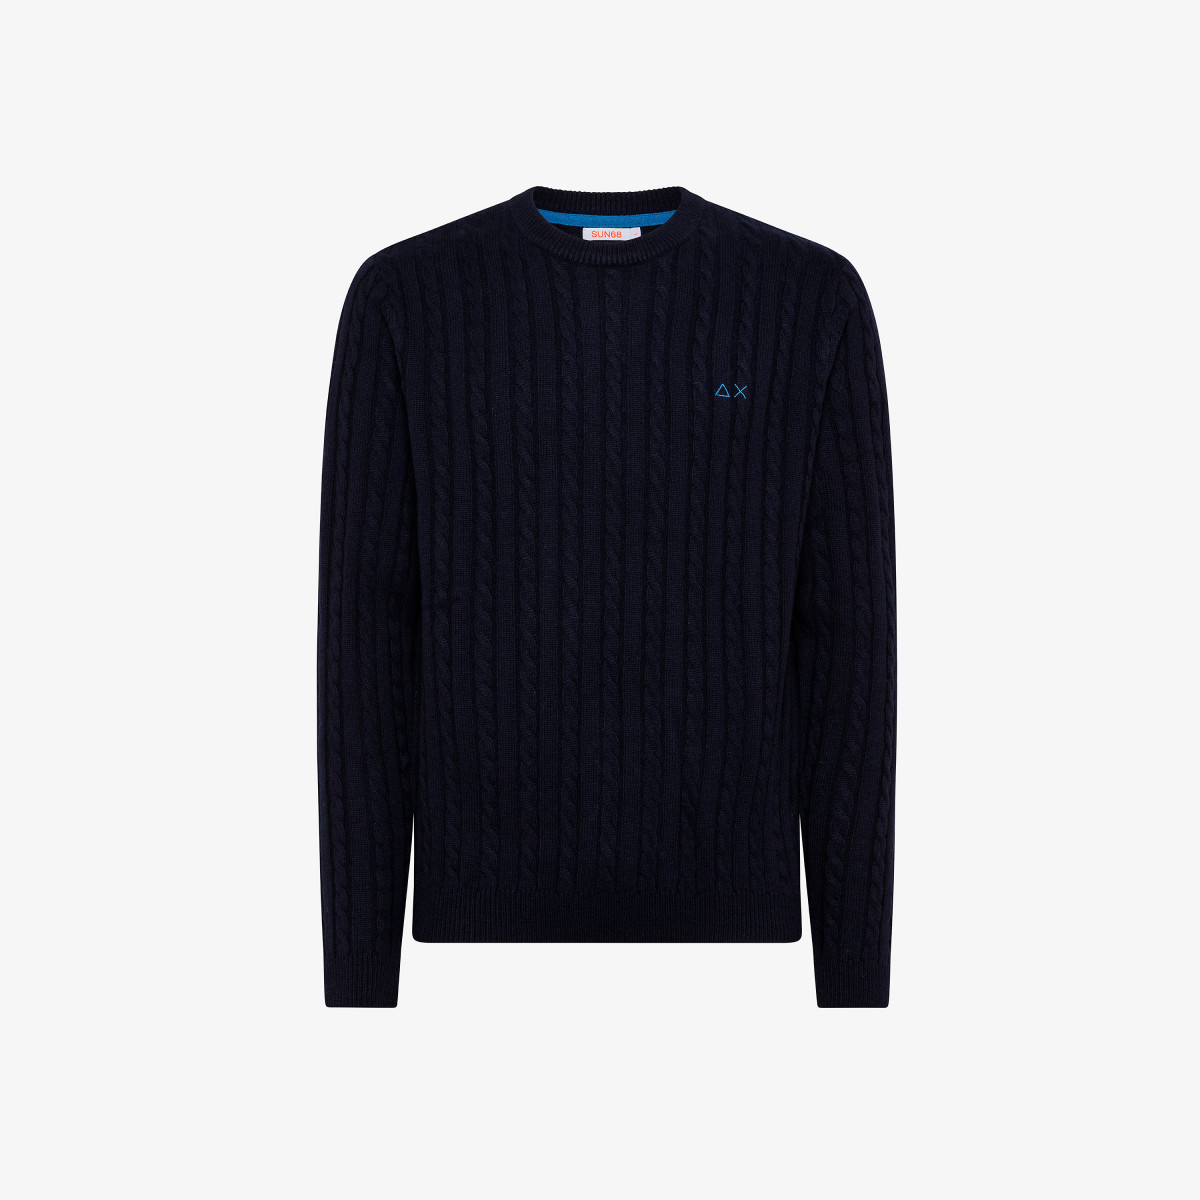 ROUND NECK CABLE NAVY BLUE